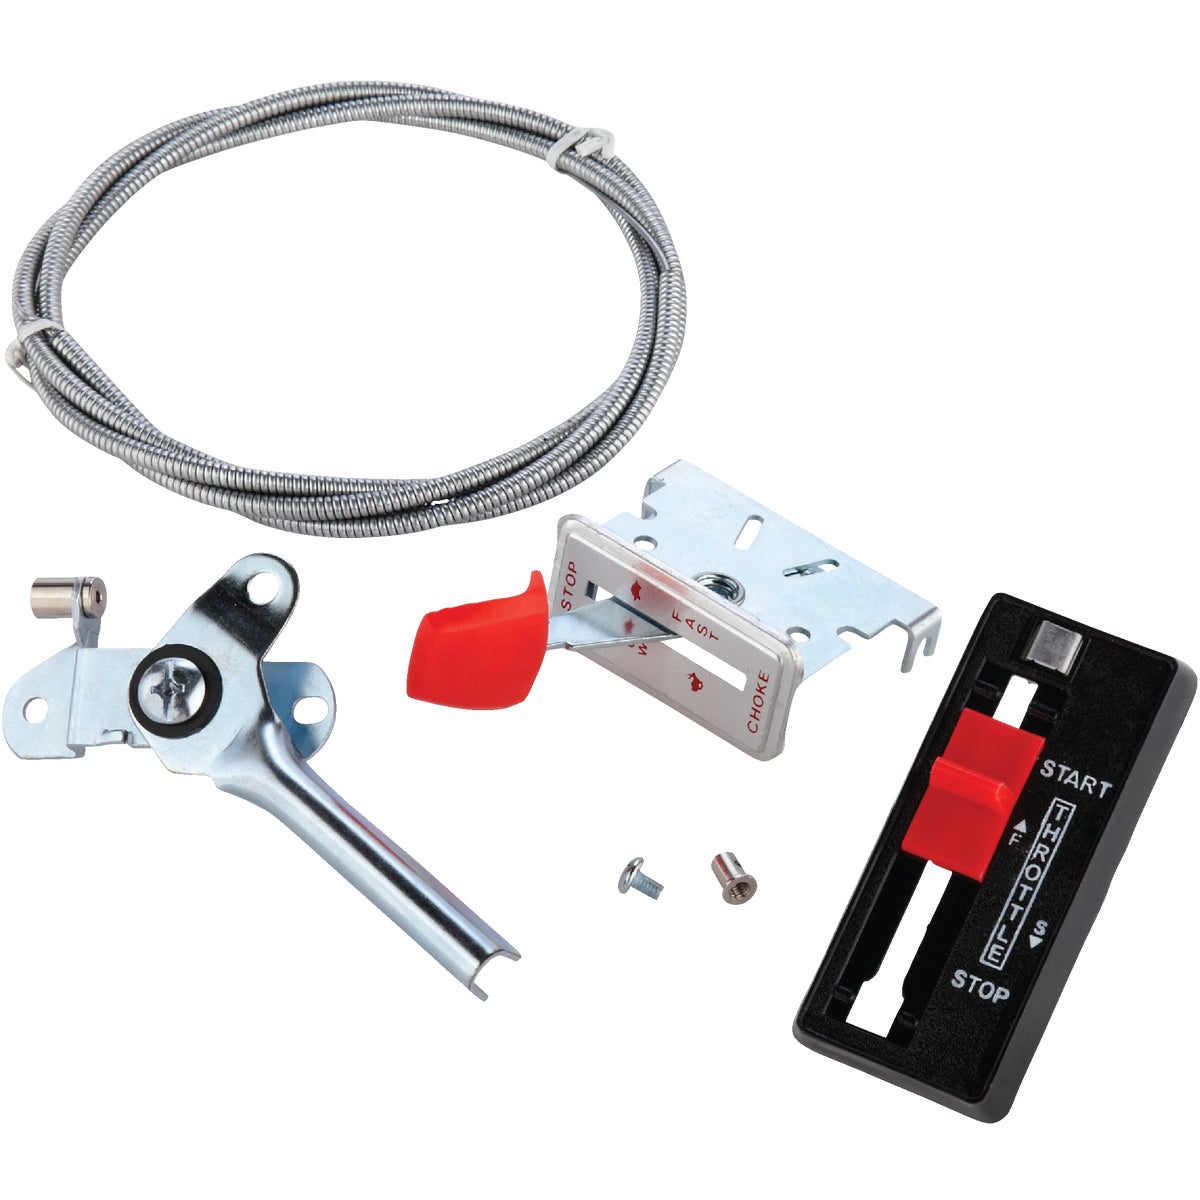 Item 763446, Throttle control kit comes with 4 options for replacement of throttle 